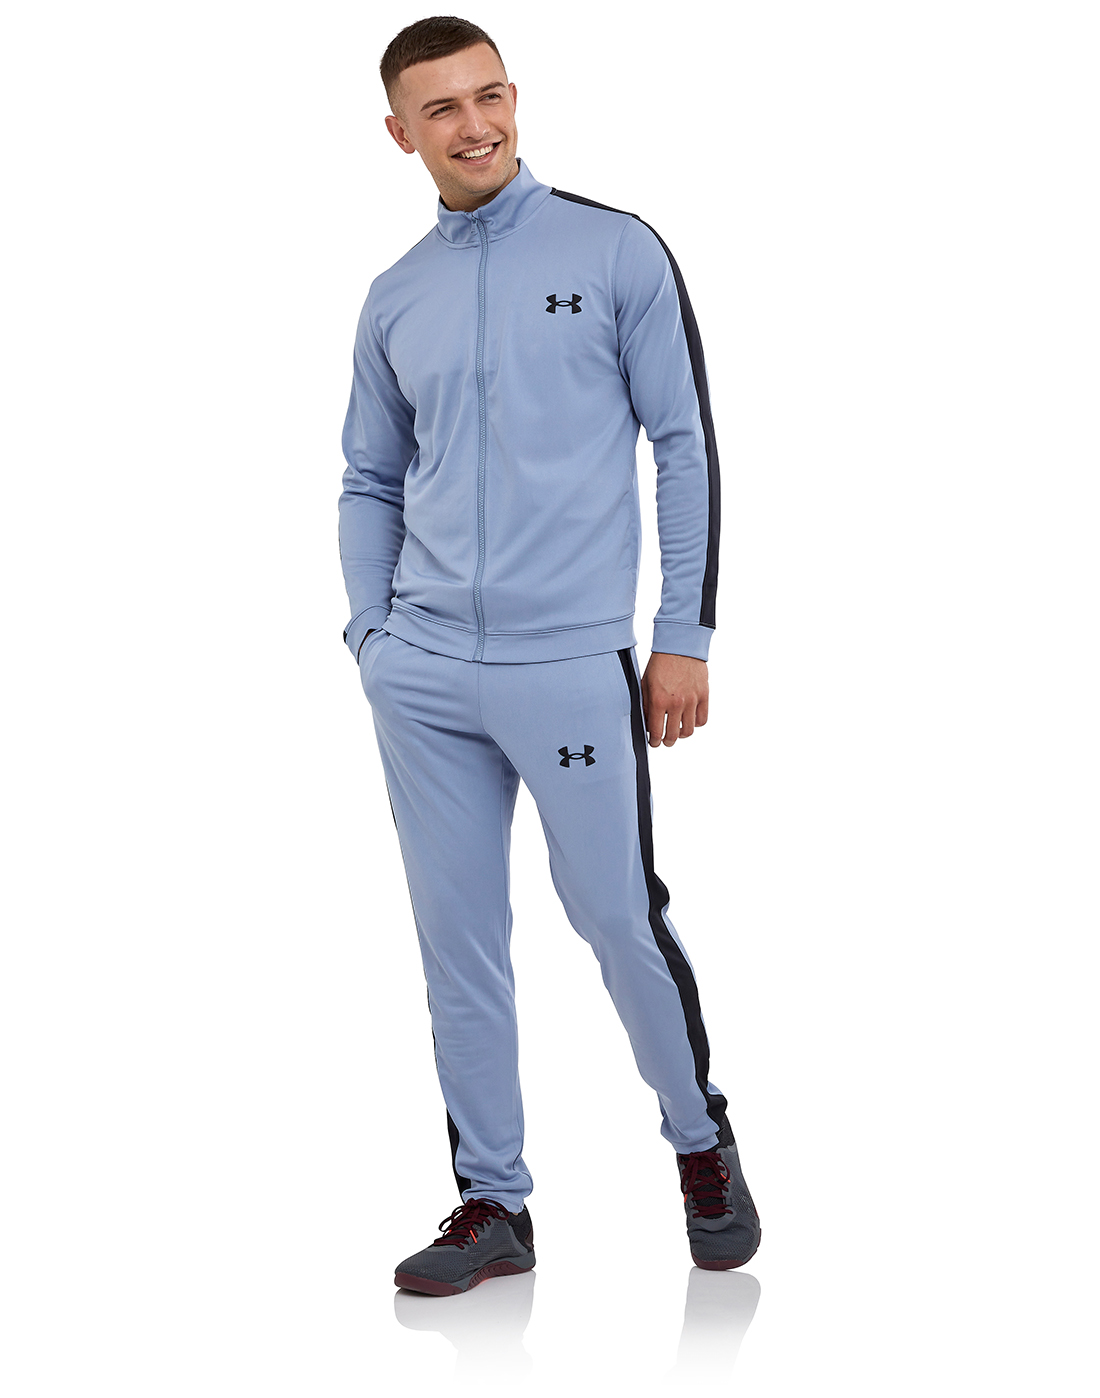 Under Armour Mens Knit TrackSuit - Blue | Life Style Sports EU